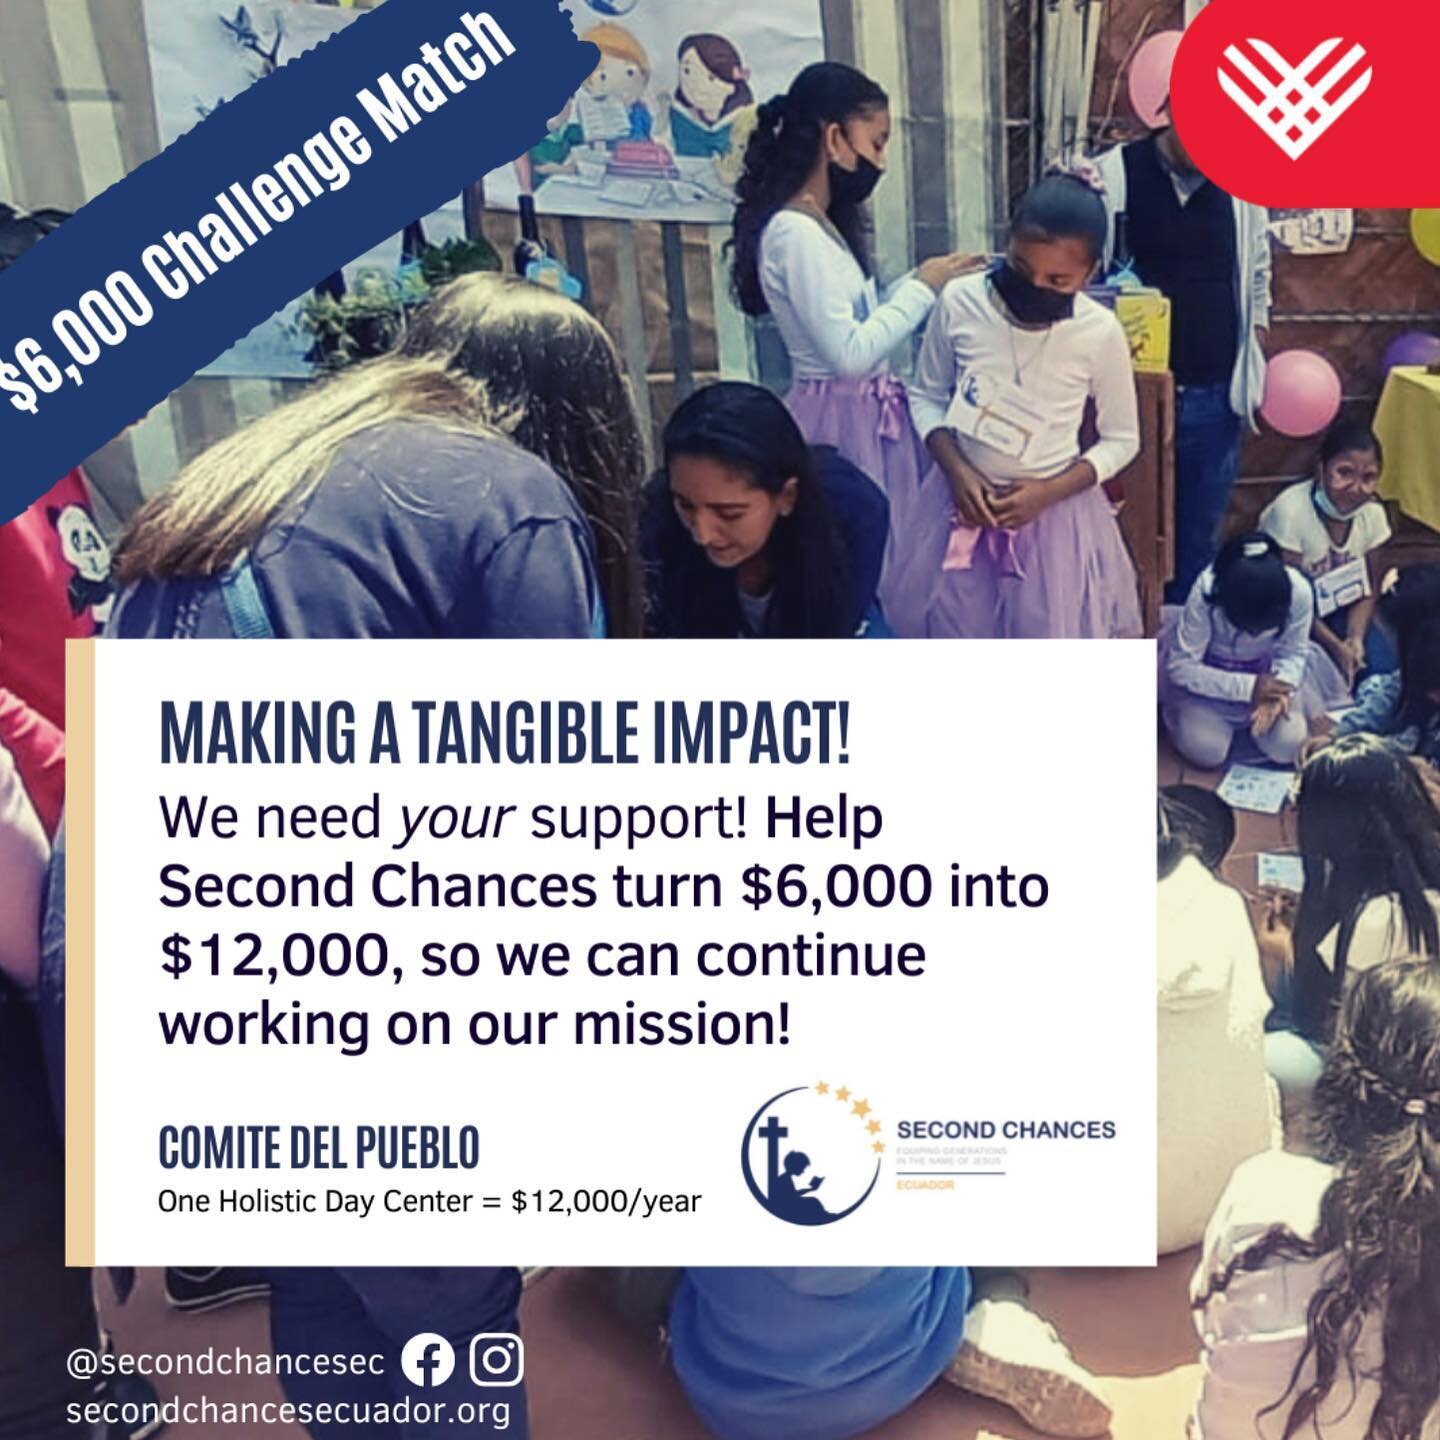 Comite Del Pueblo, the first Holistic Day Center that was started, serves many vulnerable children and families that face hunger, insecurity, and lack of employment. We need your support! Help Second Chances turn $6,000 into $12,000, so we can contin